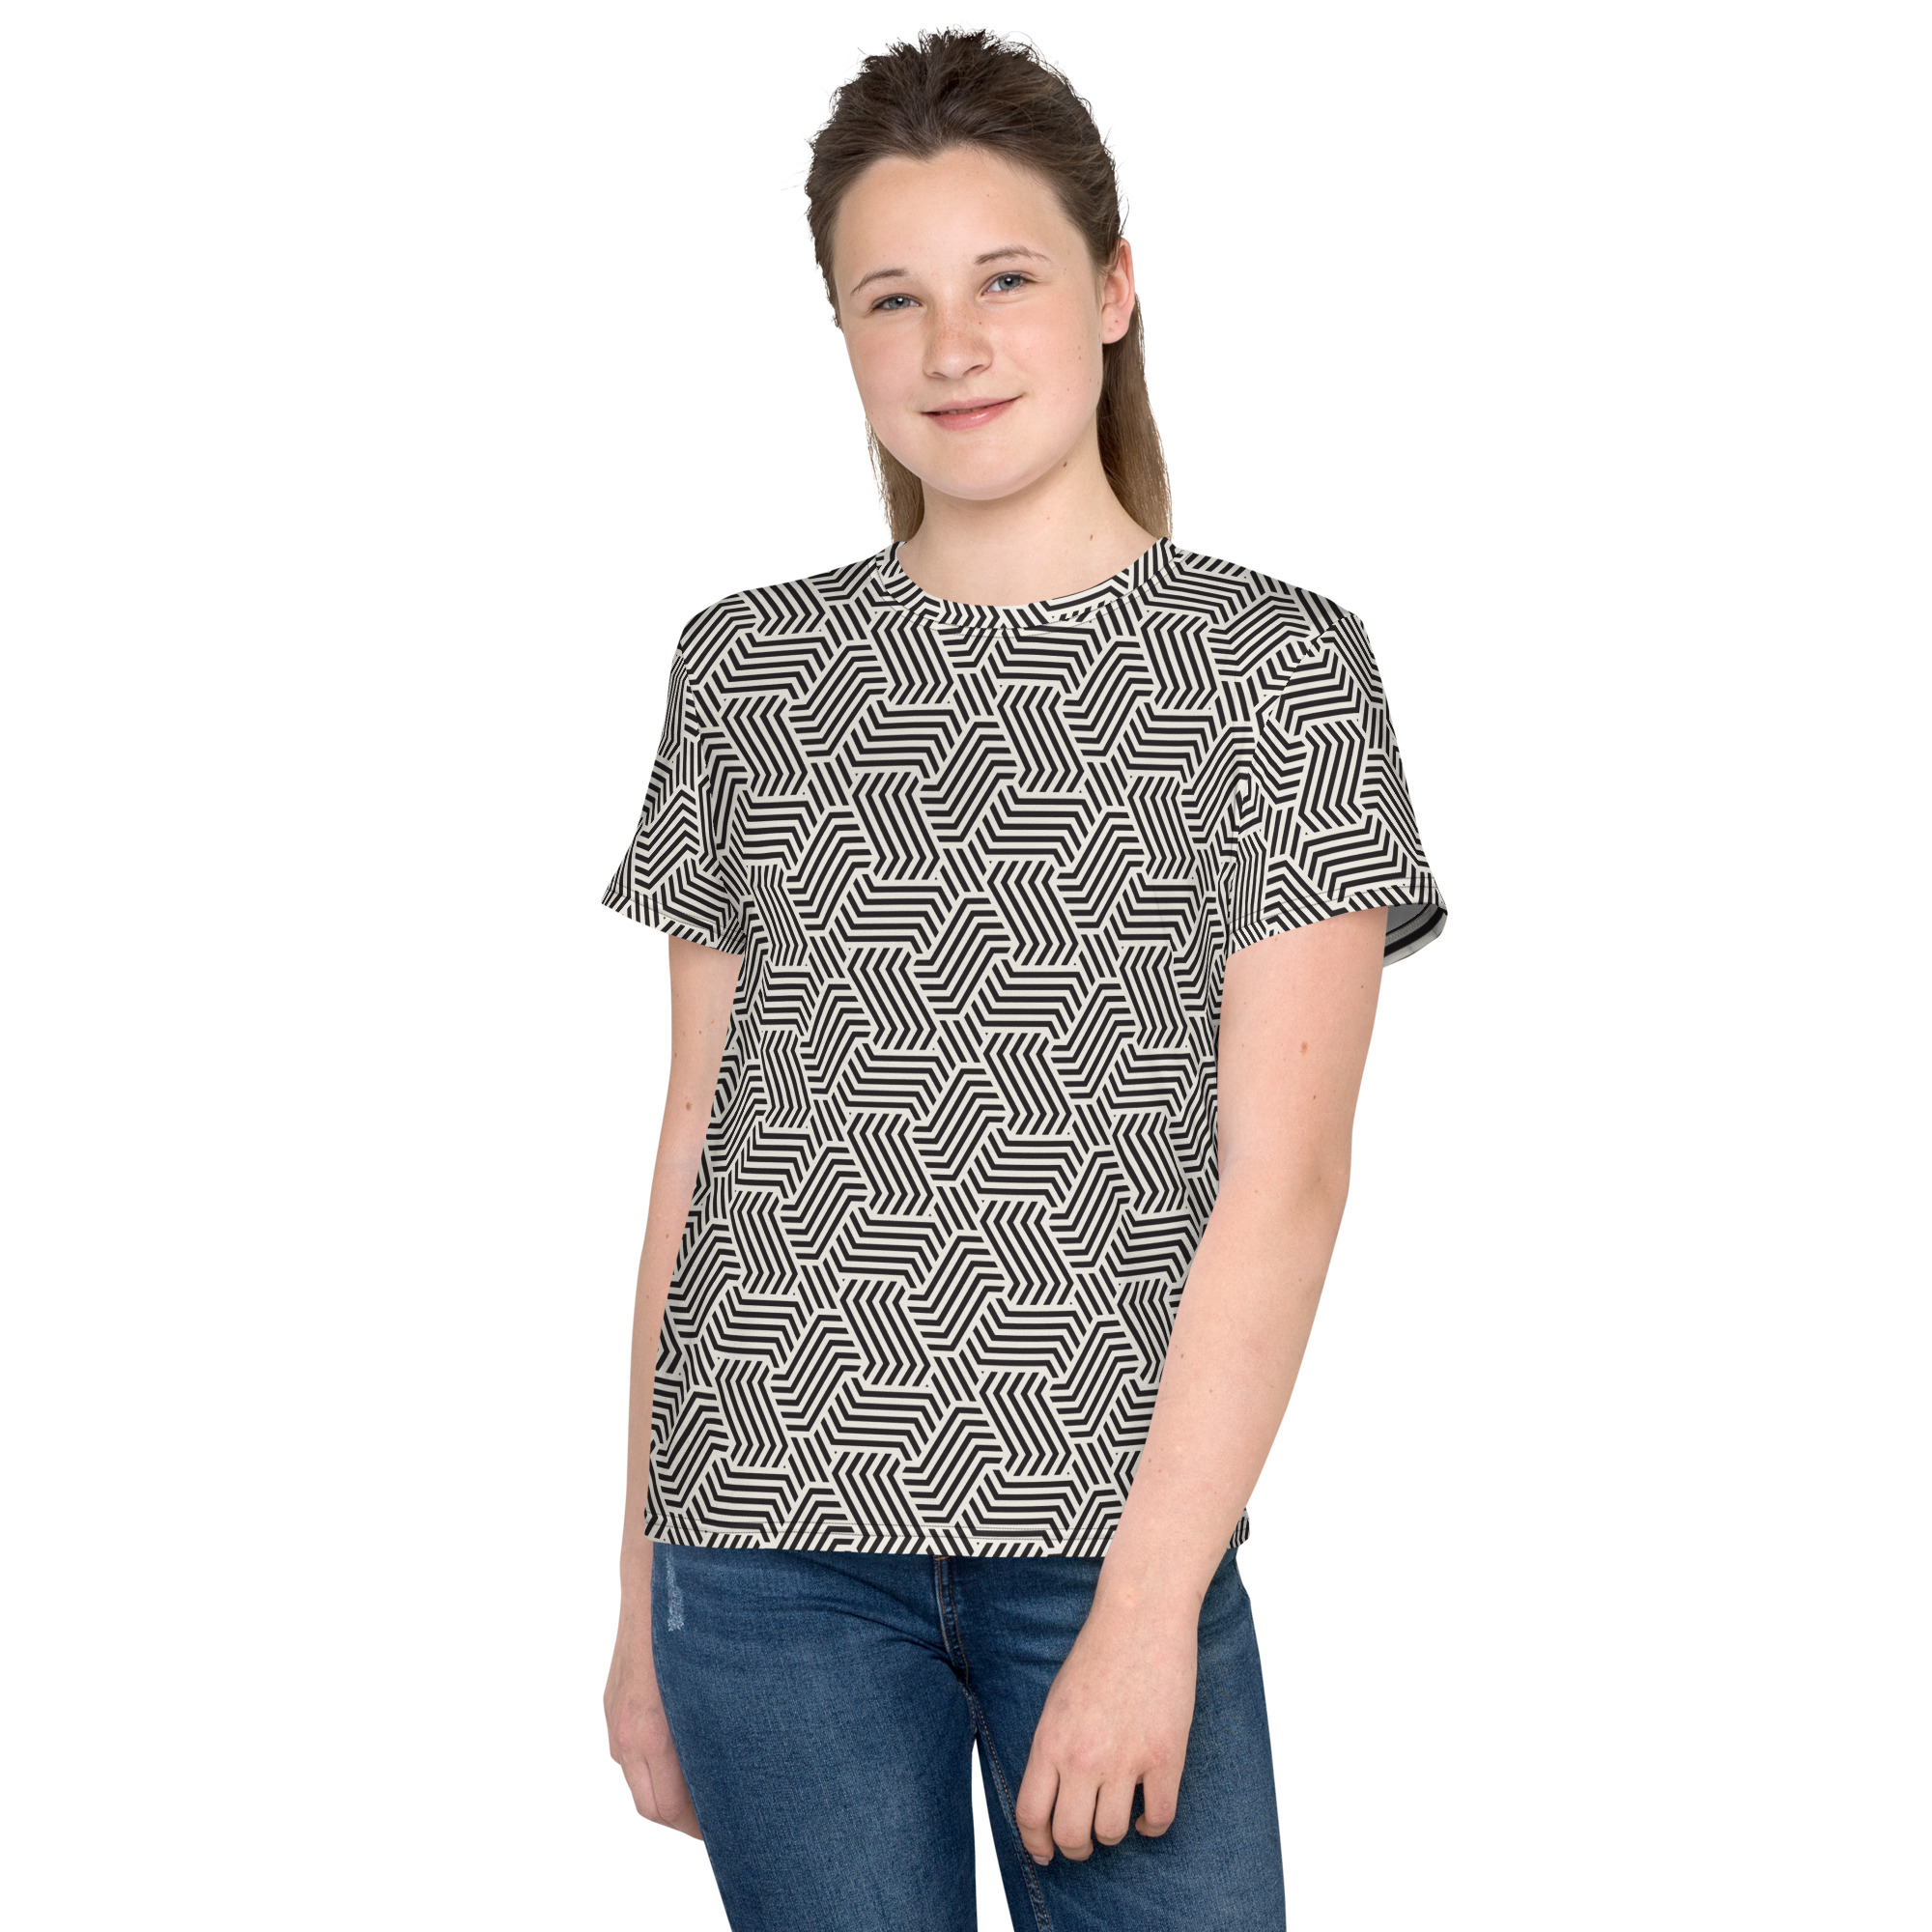 ⭐⭐⭐ Black and White Style Youth crew neck t-shirt